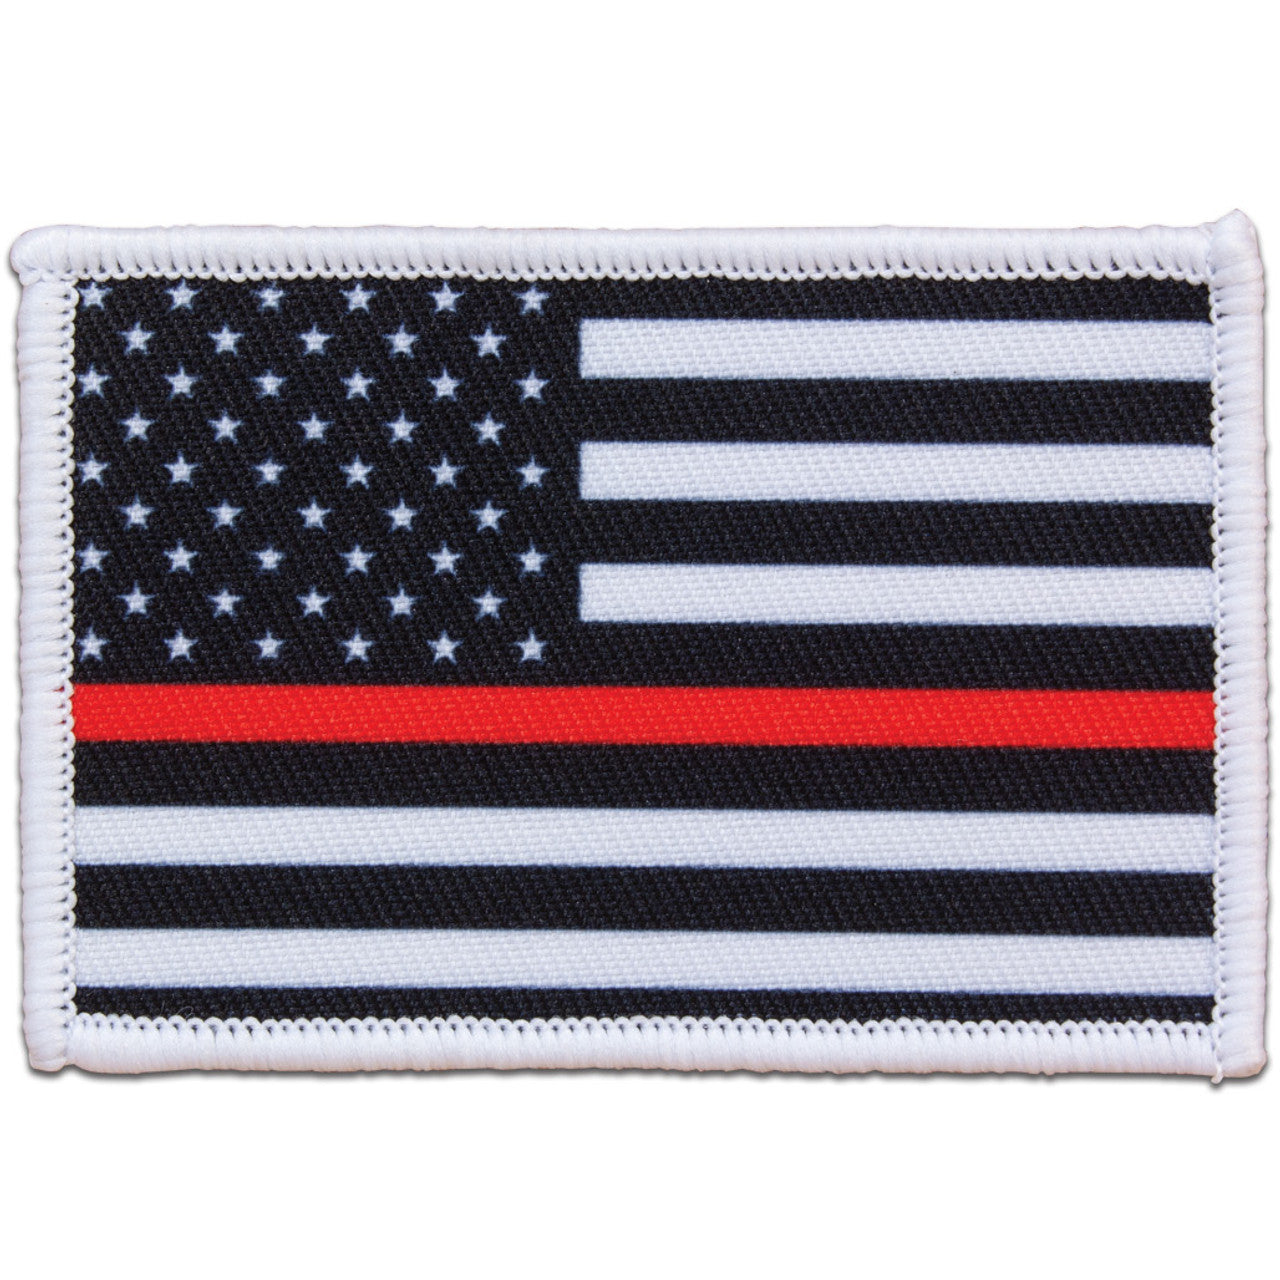 "THIN RED LINE FLAG" MORALE PATCH